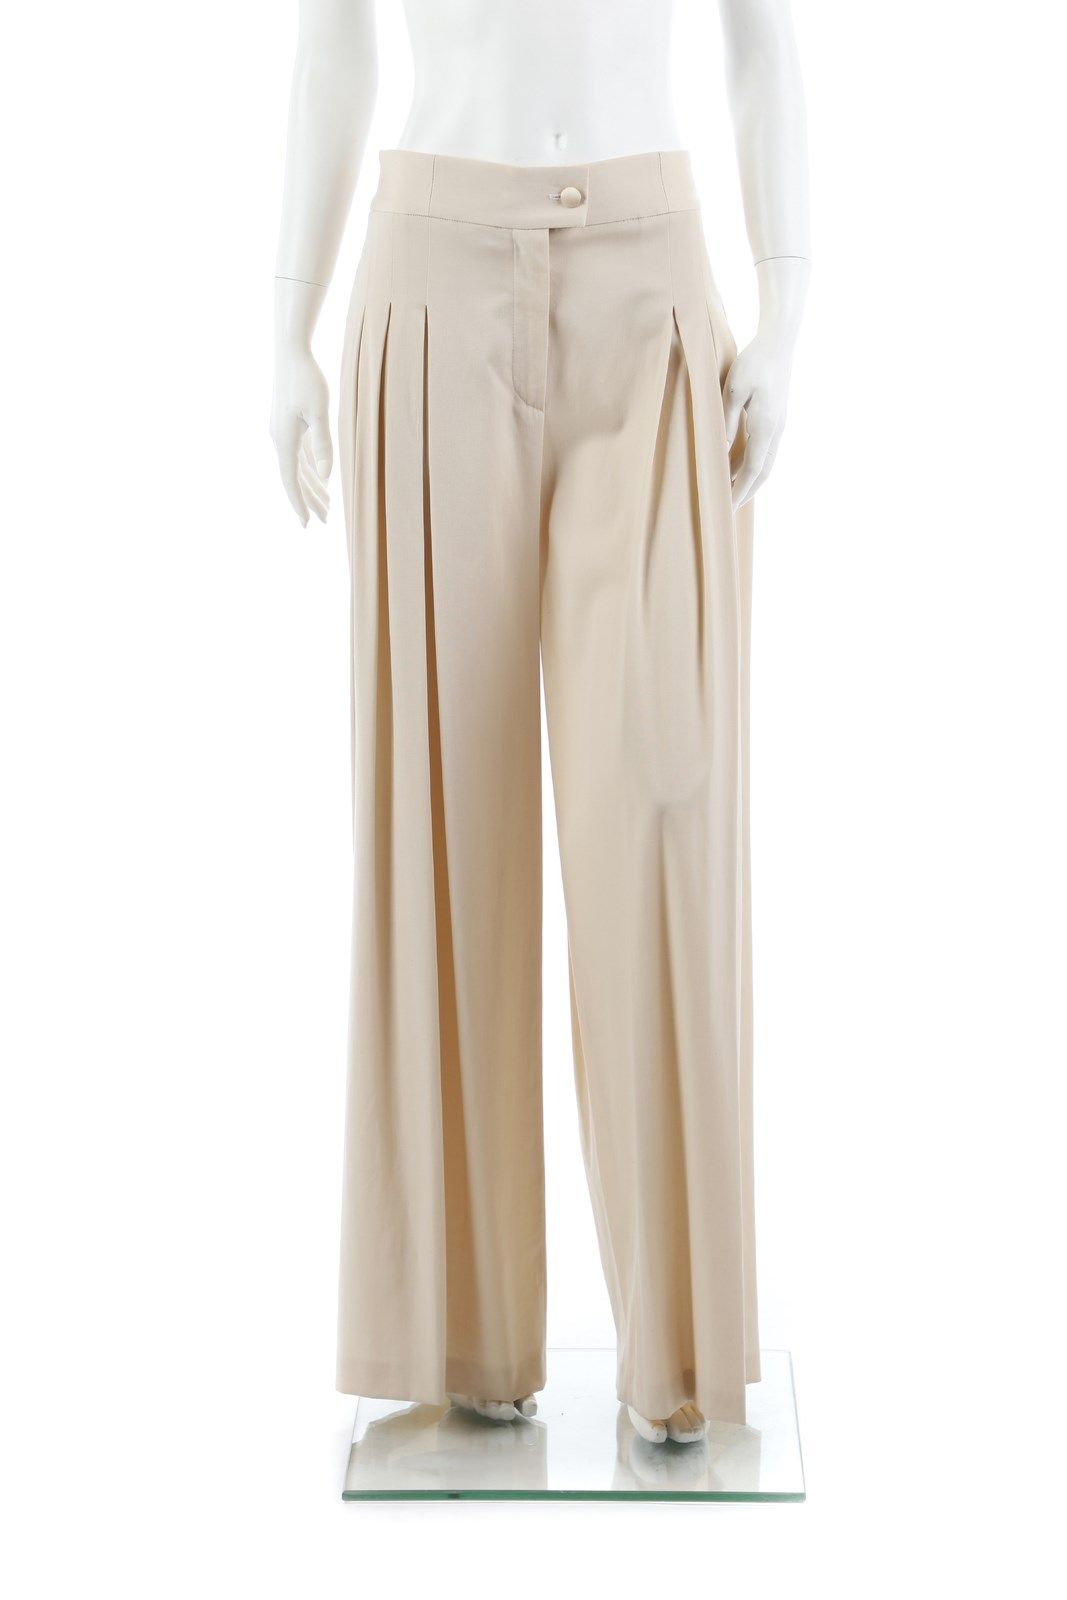 ANTONIO MARRAS White pleated palazzo trousers. Size 46IT. Made in Italy. Weiße p&hellip;